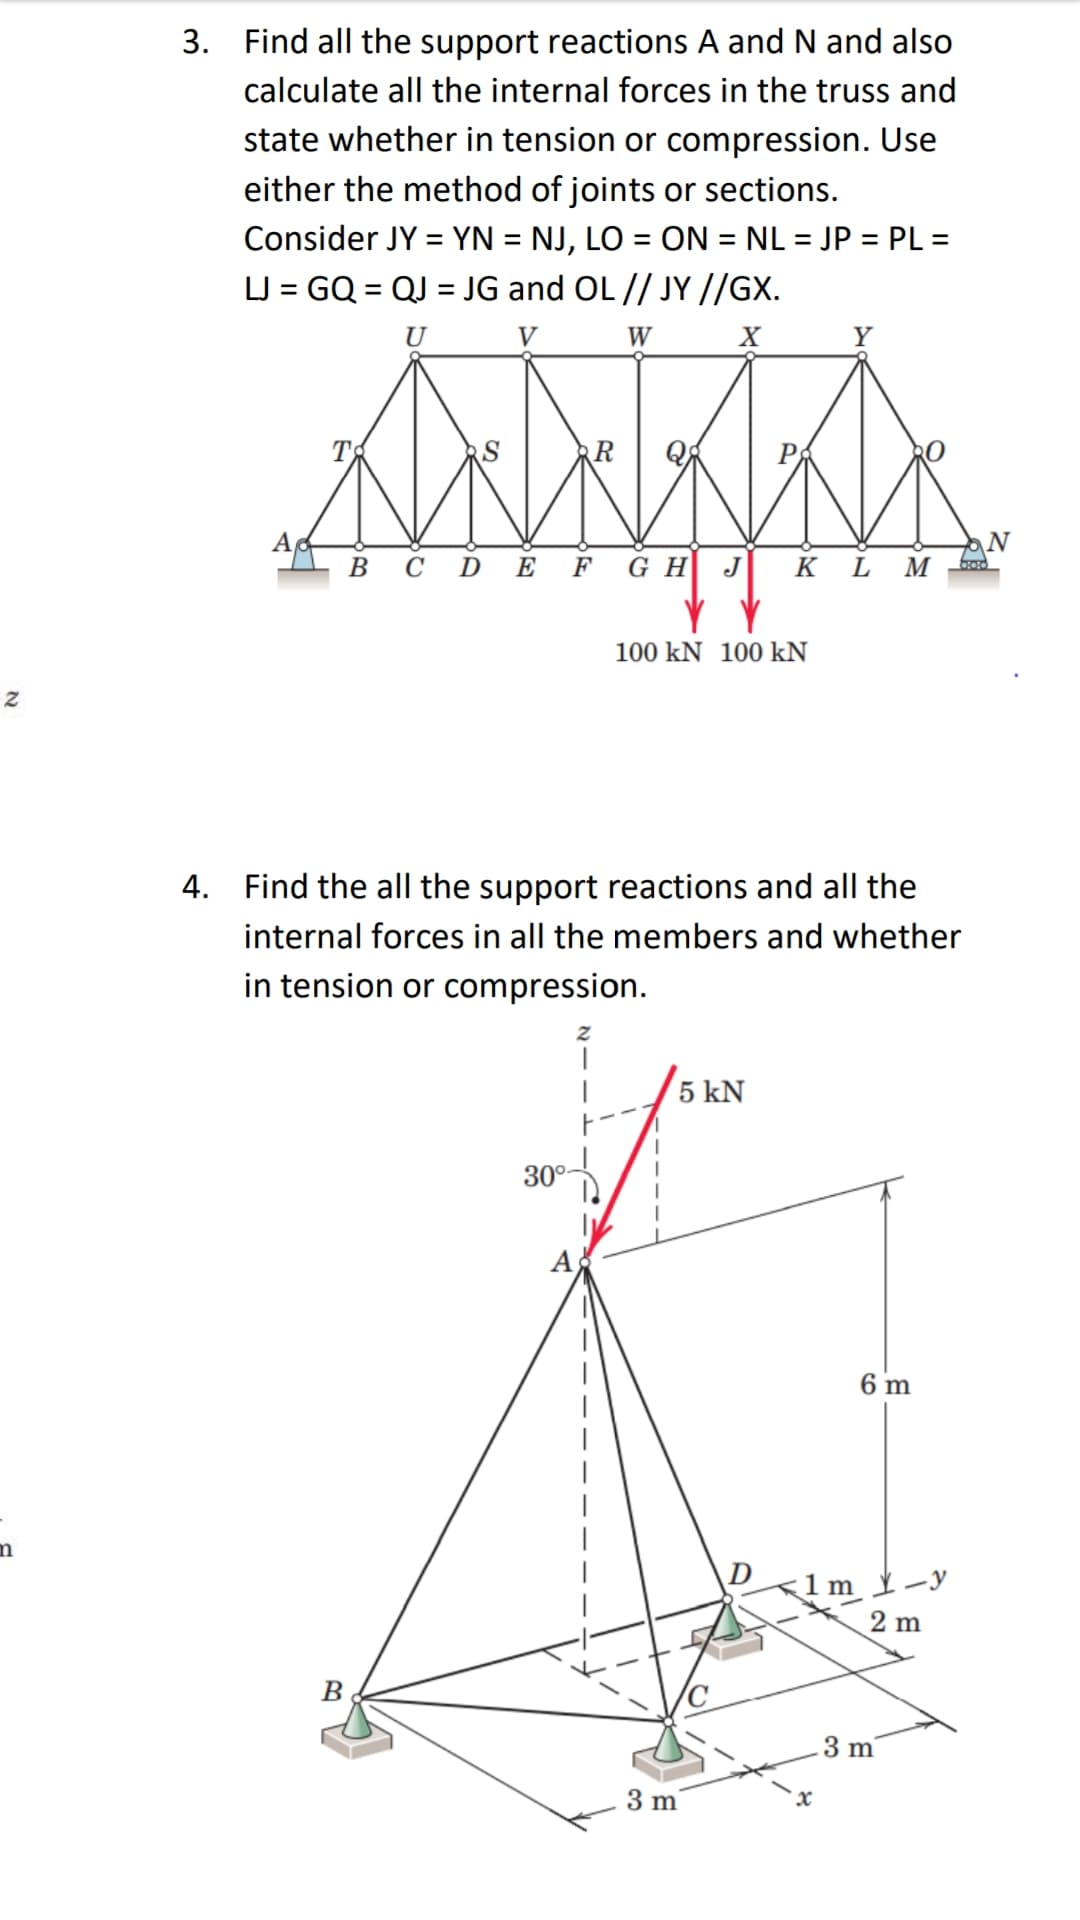 3. Find all the support reactions A and N and also
calculate all the internal forces in the truss and
state whether in tension or compression. Use
either the method of joints or sections.
Consider JY = YN = NJ, LO = ON = NL = JP = PL =
LJ = GQ = QJ = JG and OL // JY //GX.
%3D
%3D
%3D
U
V
W
Y
T
A
ВСDE F GH J
N
K L M
100 kN 100 kN
4. Find the all the support reactions and all the
internal forces in all the members and whether
in tension or compression.
5 kN
30°-
A
6 m
D
<1m -y
2 m
B
3 m
3 m
